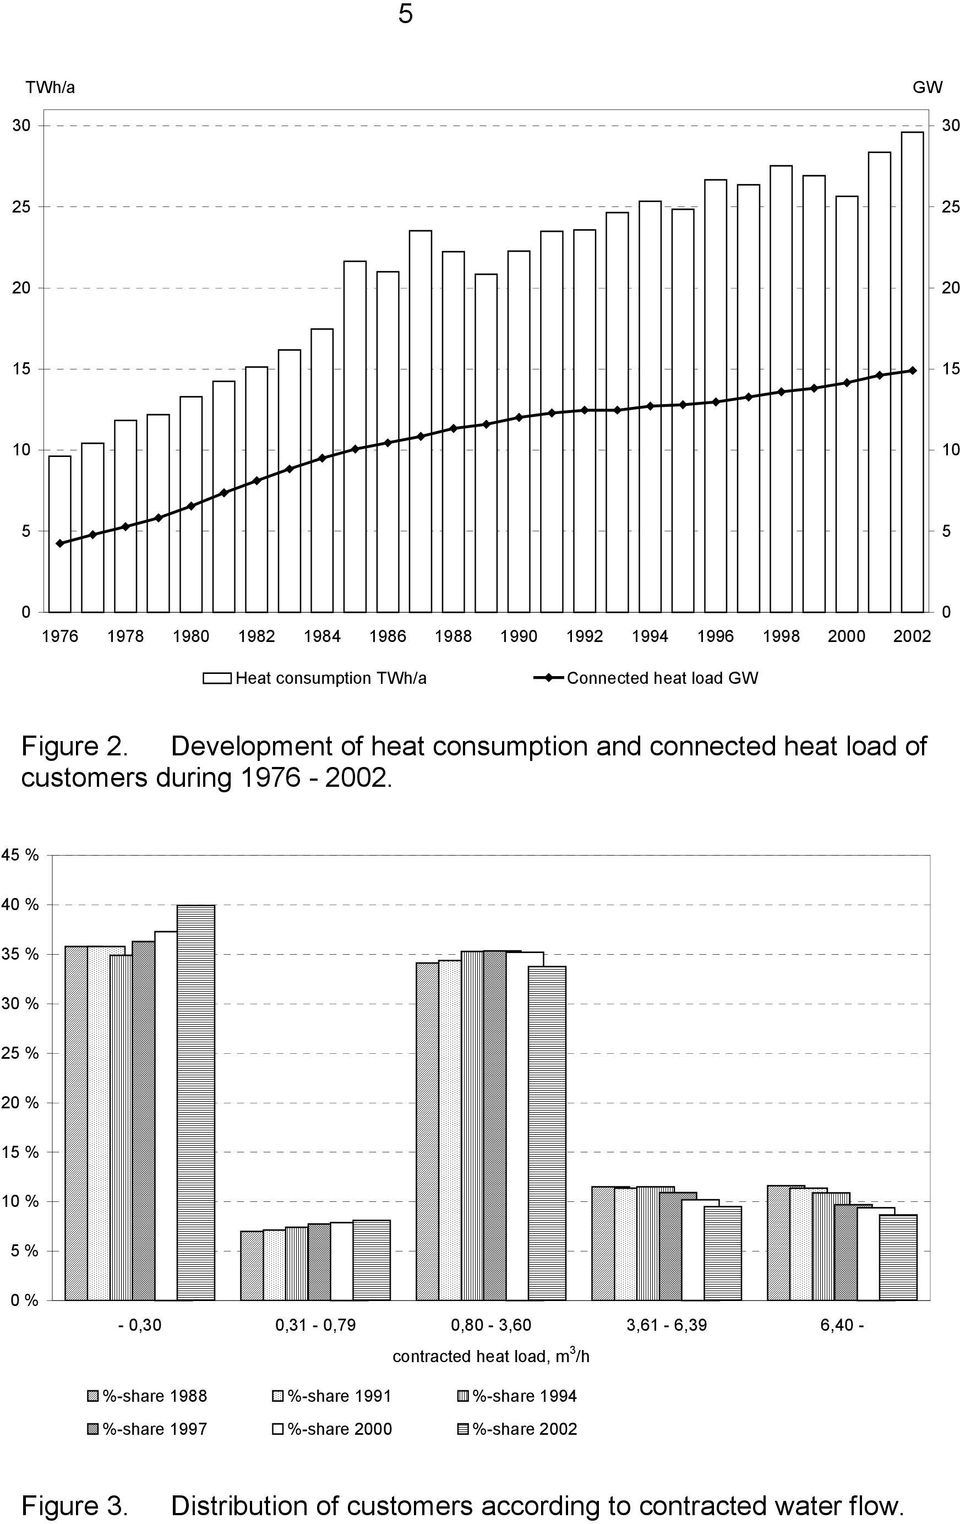 Development of heat consumption and connected heat load of customers during 1976-2002.